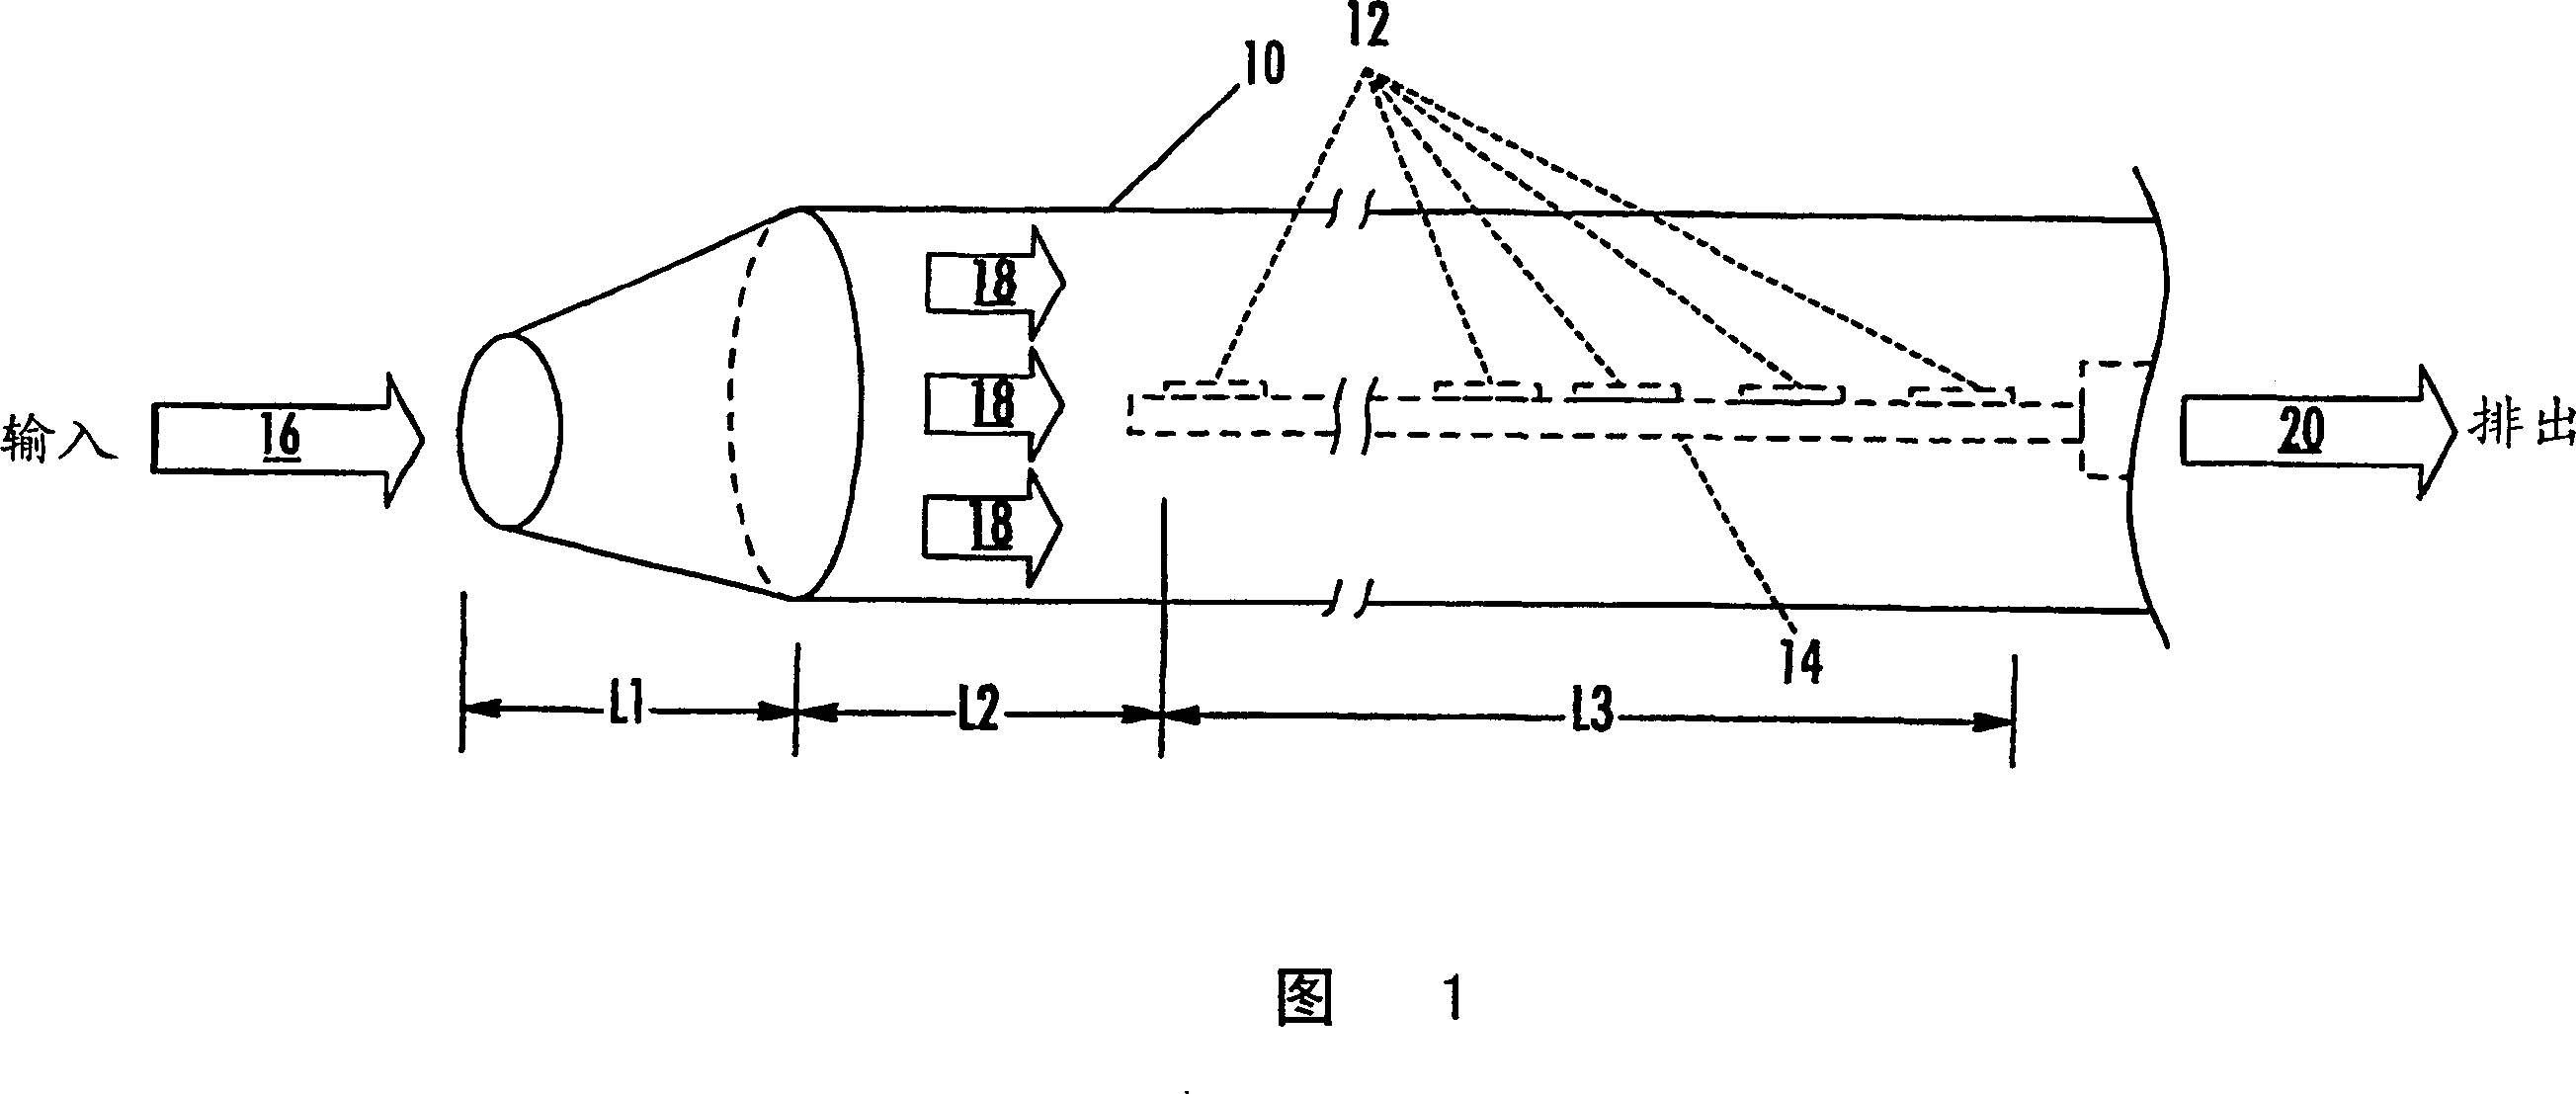 Method of fabricating an oxide layer on a silicon carbide layer utilizing NO2